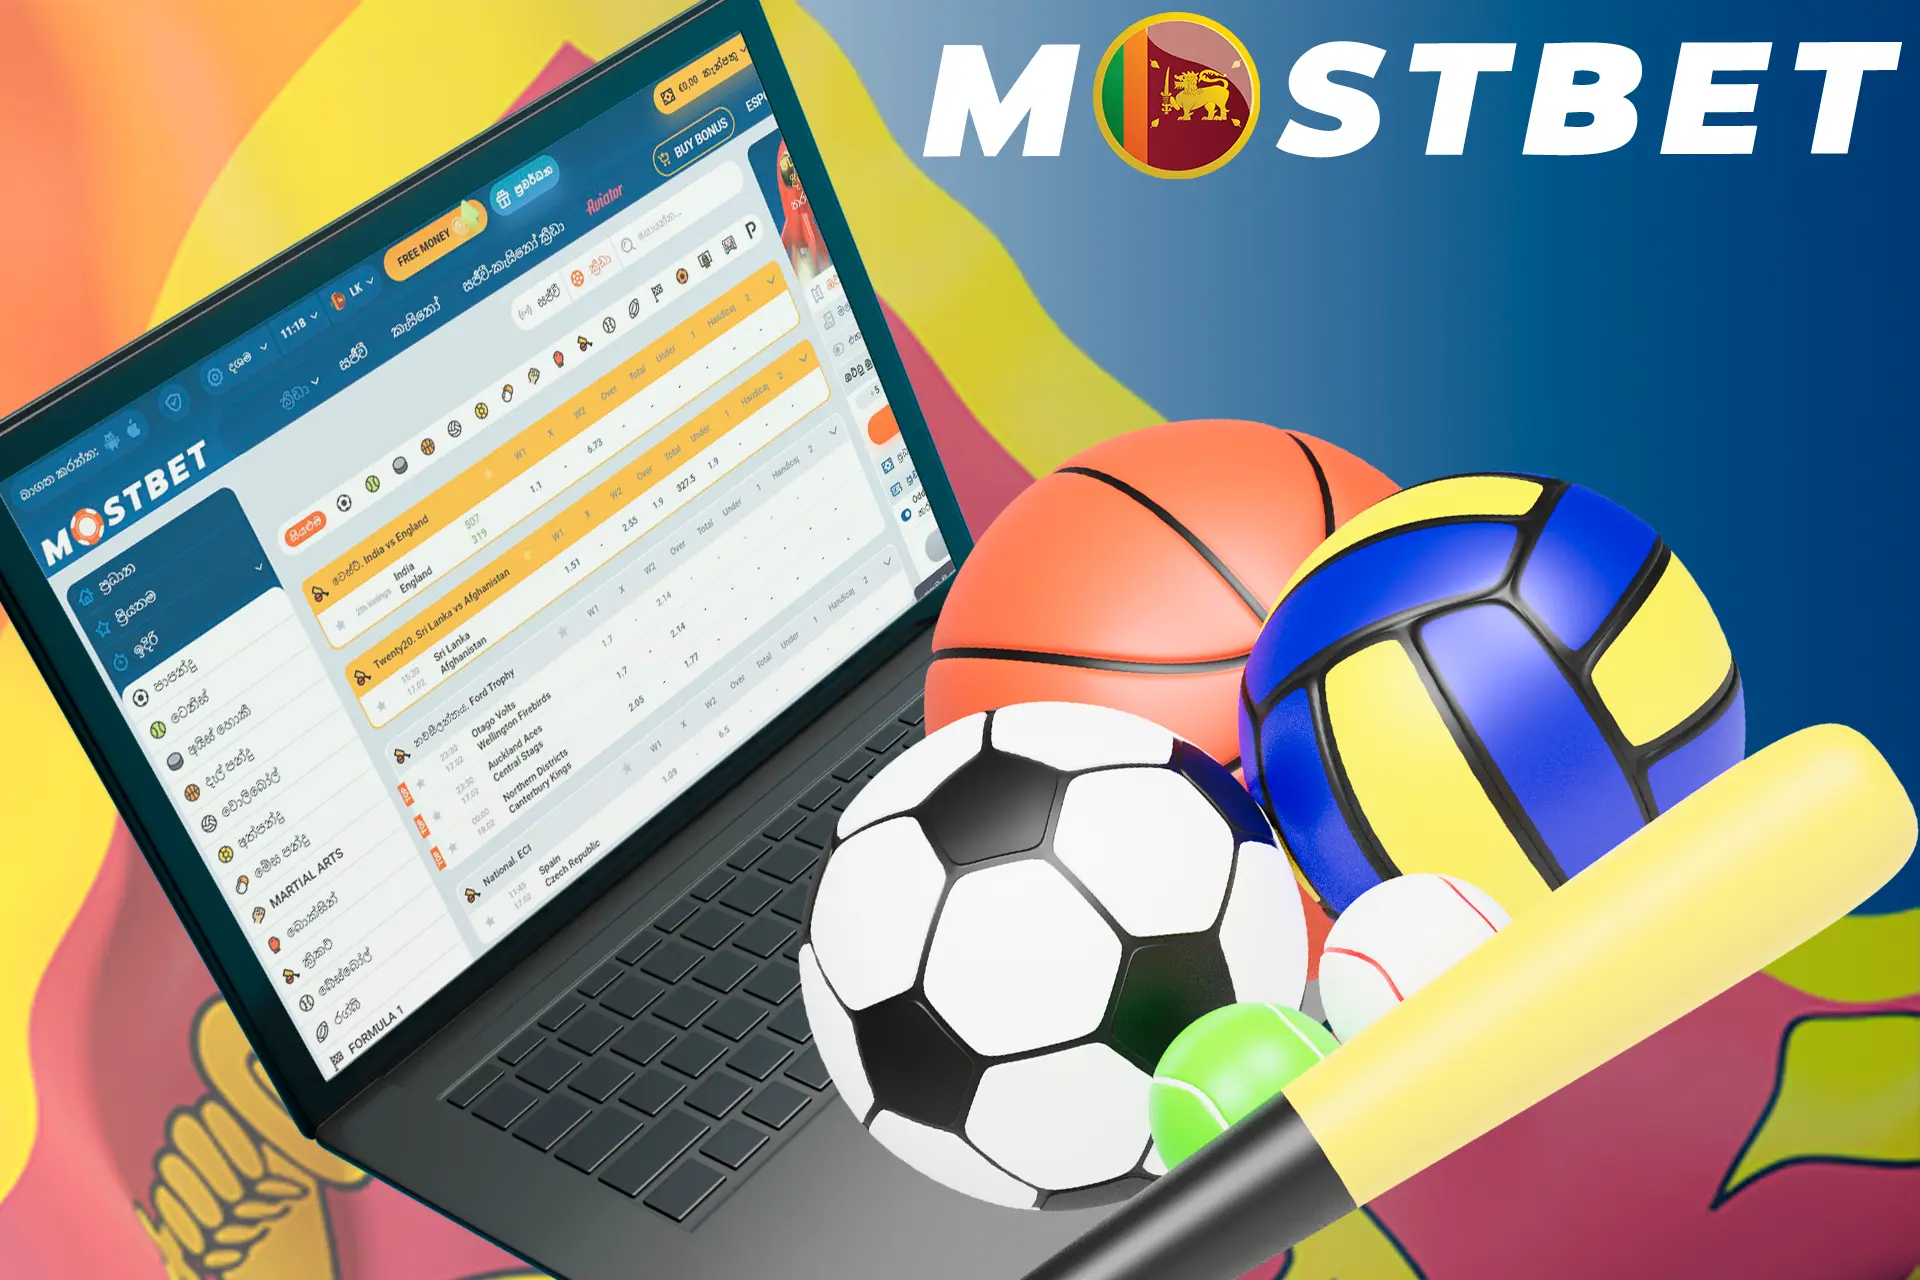 Many types of bets on various sports Mostbet Sri Lanka